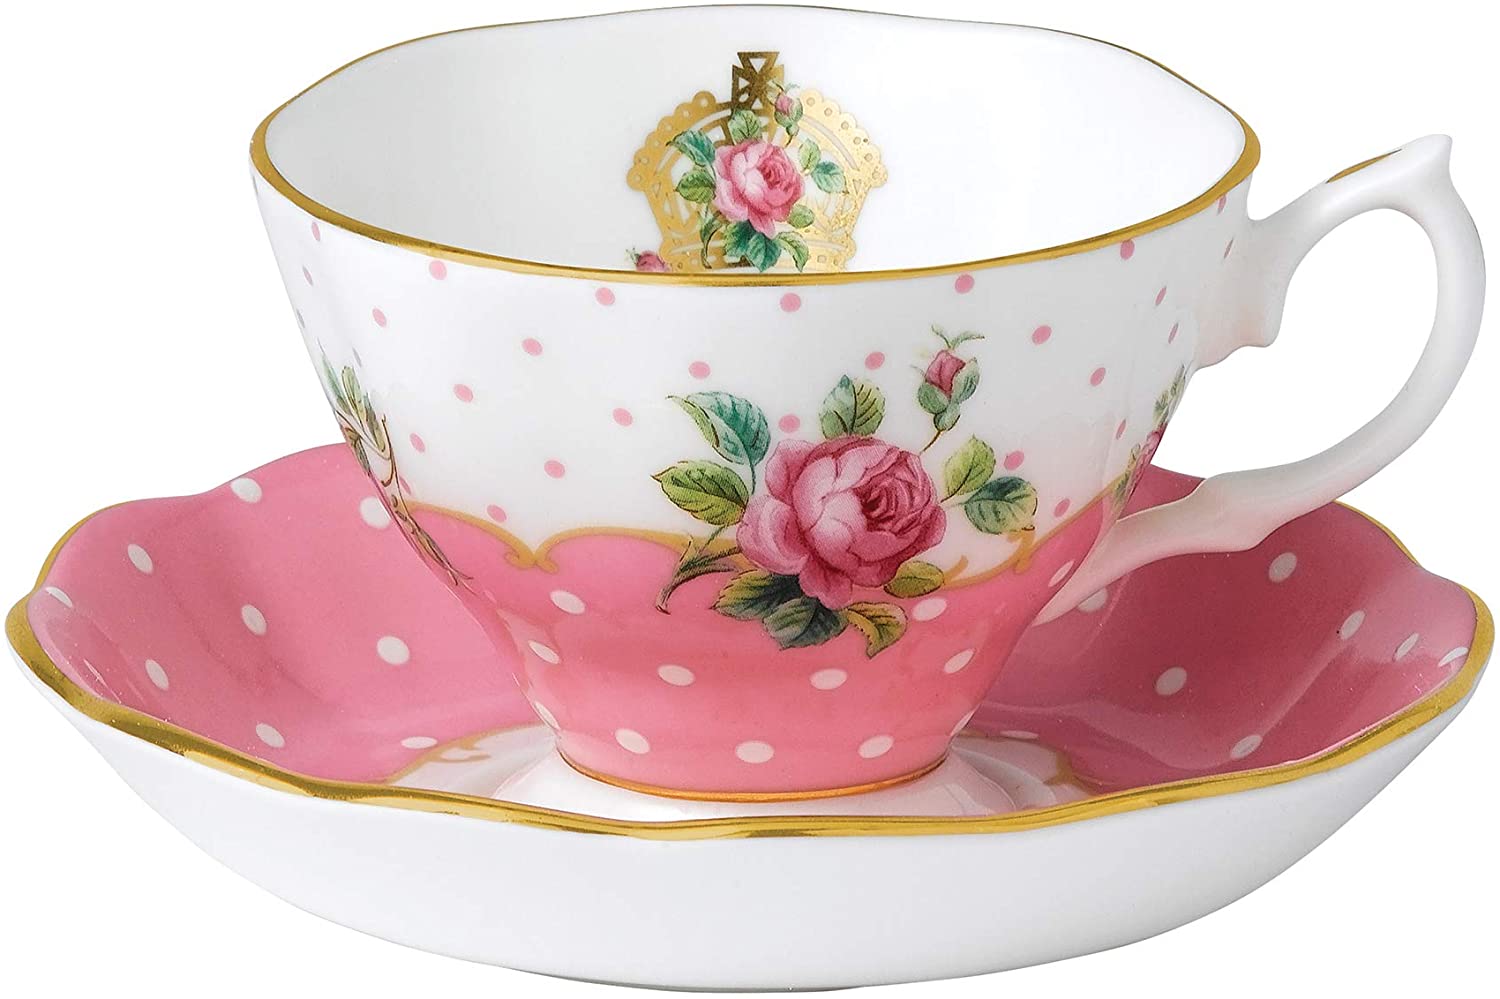 Royal-Albert-Cheeky-Pink-New-Country-Roses-Vintage-Teacup-and-Saucer-